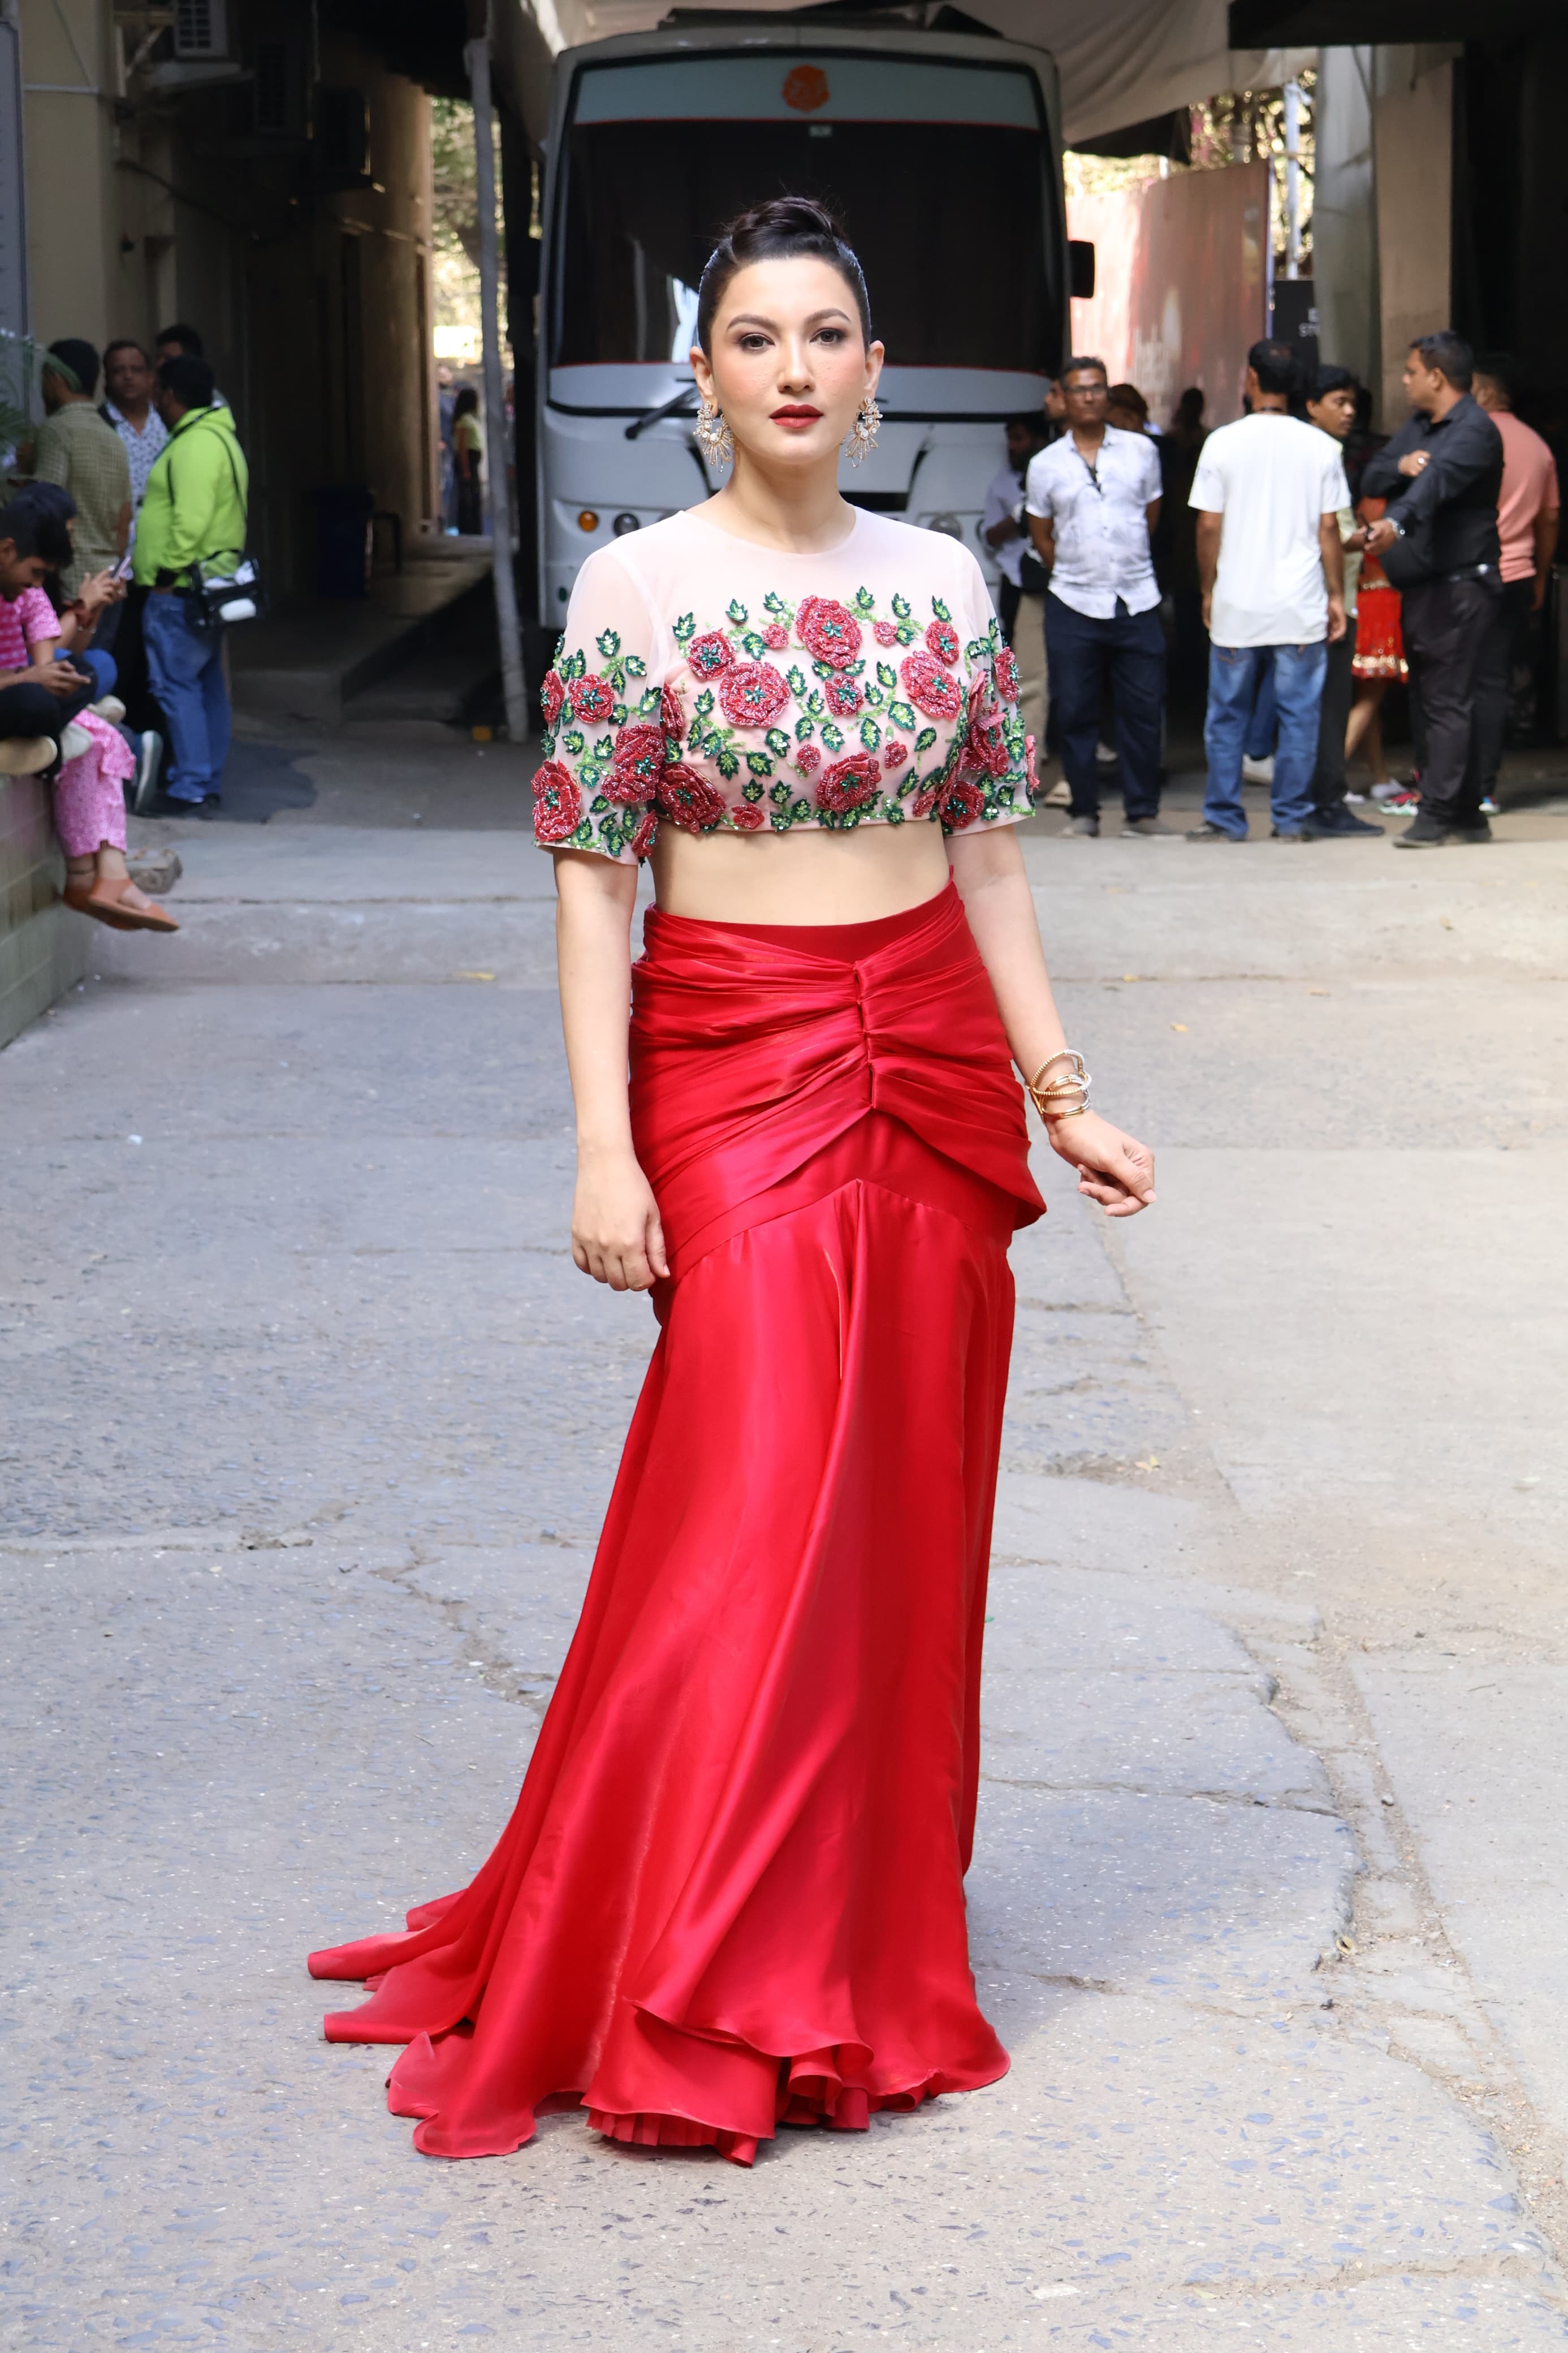 Gauhar Khan was spotted on the sets of JDJ 11. The actress was dressed in fiery red attire!